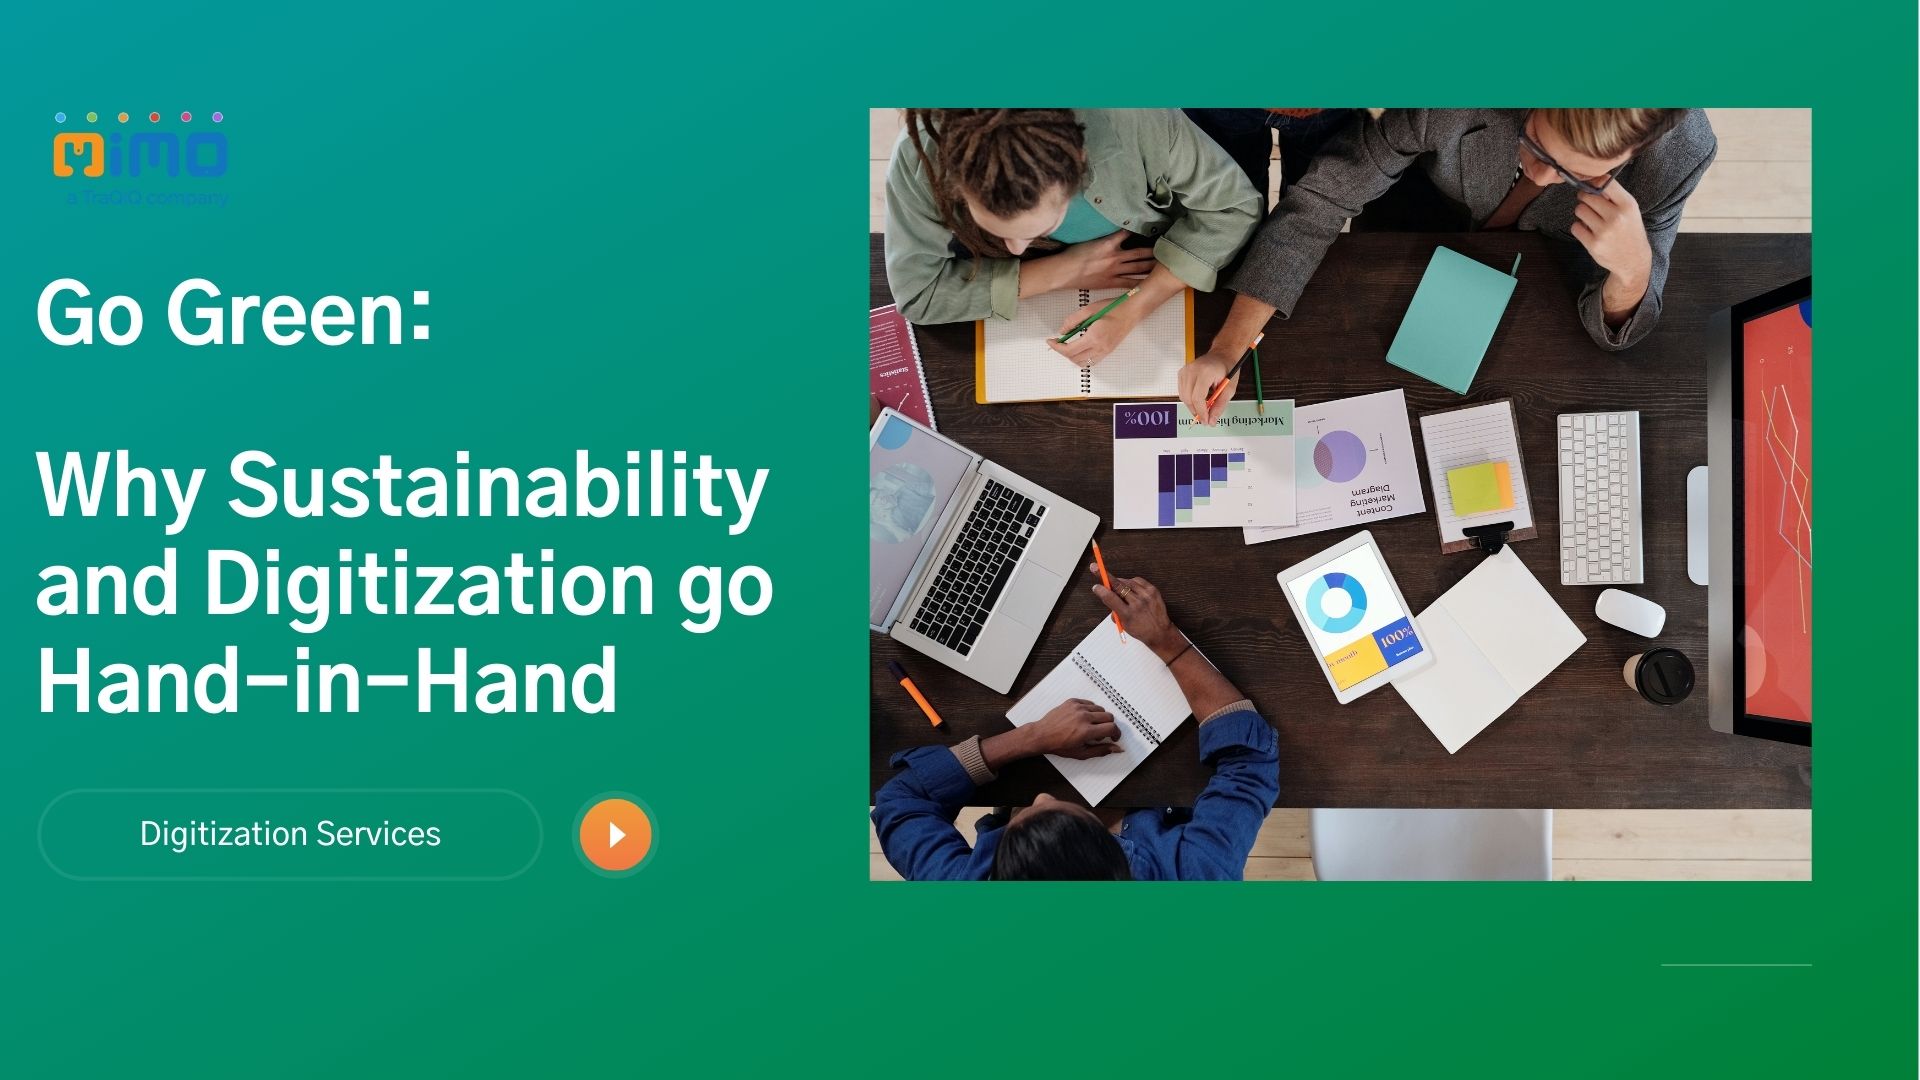 Sustainability and Digitization go Hand-in-Hand